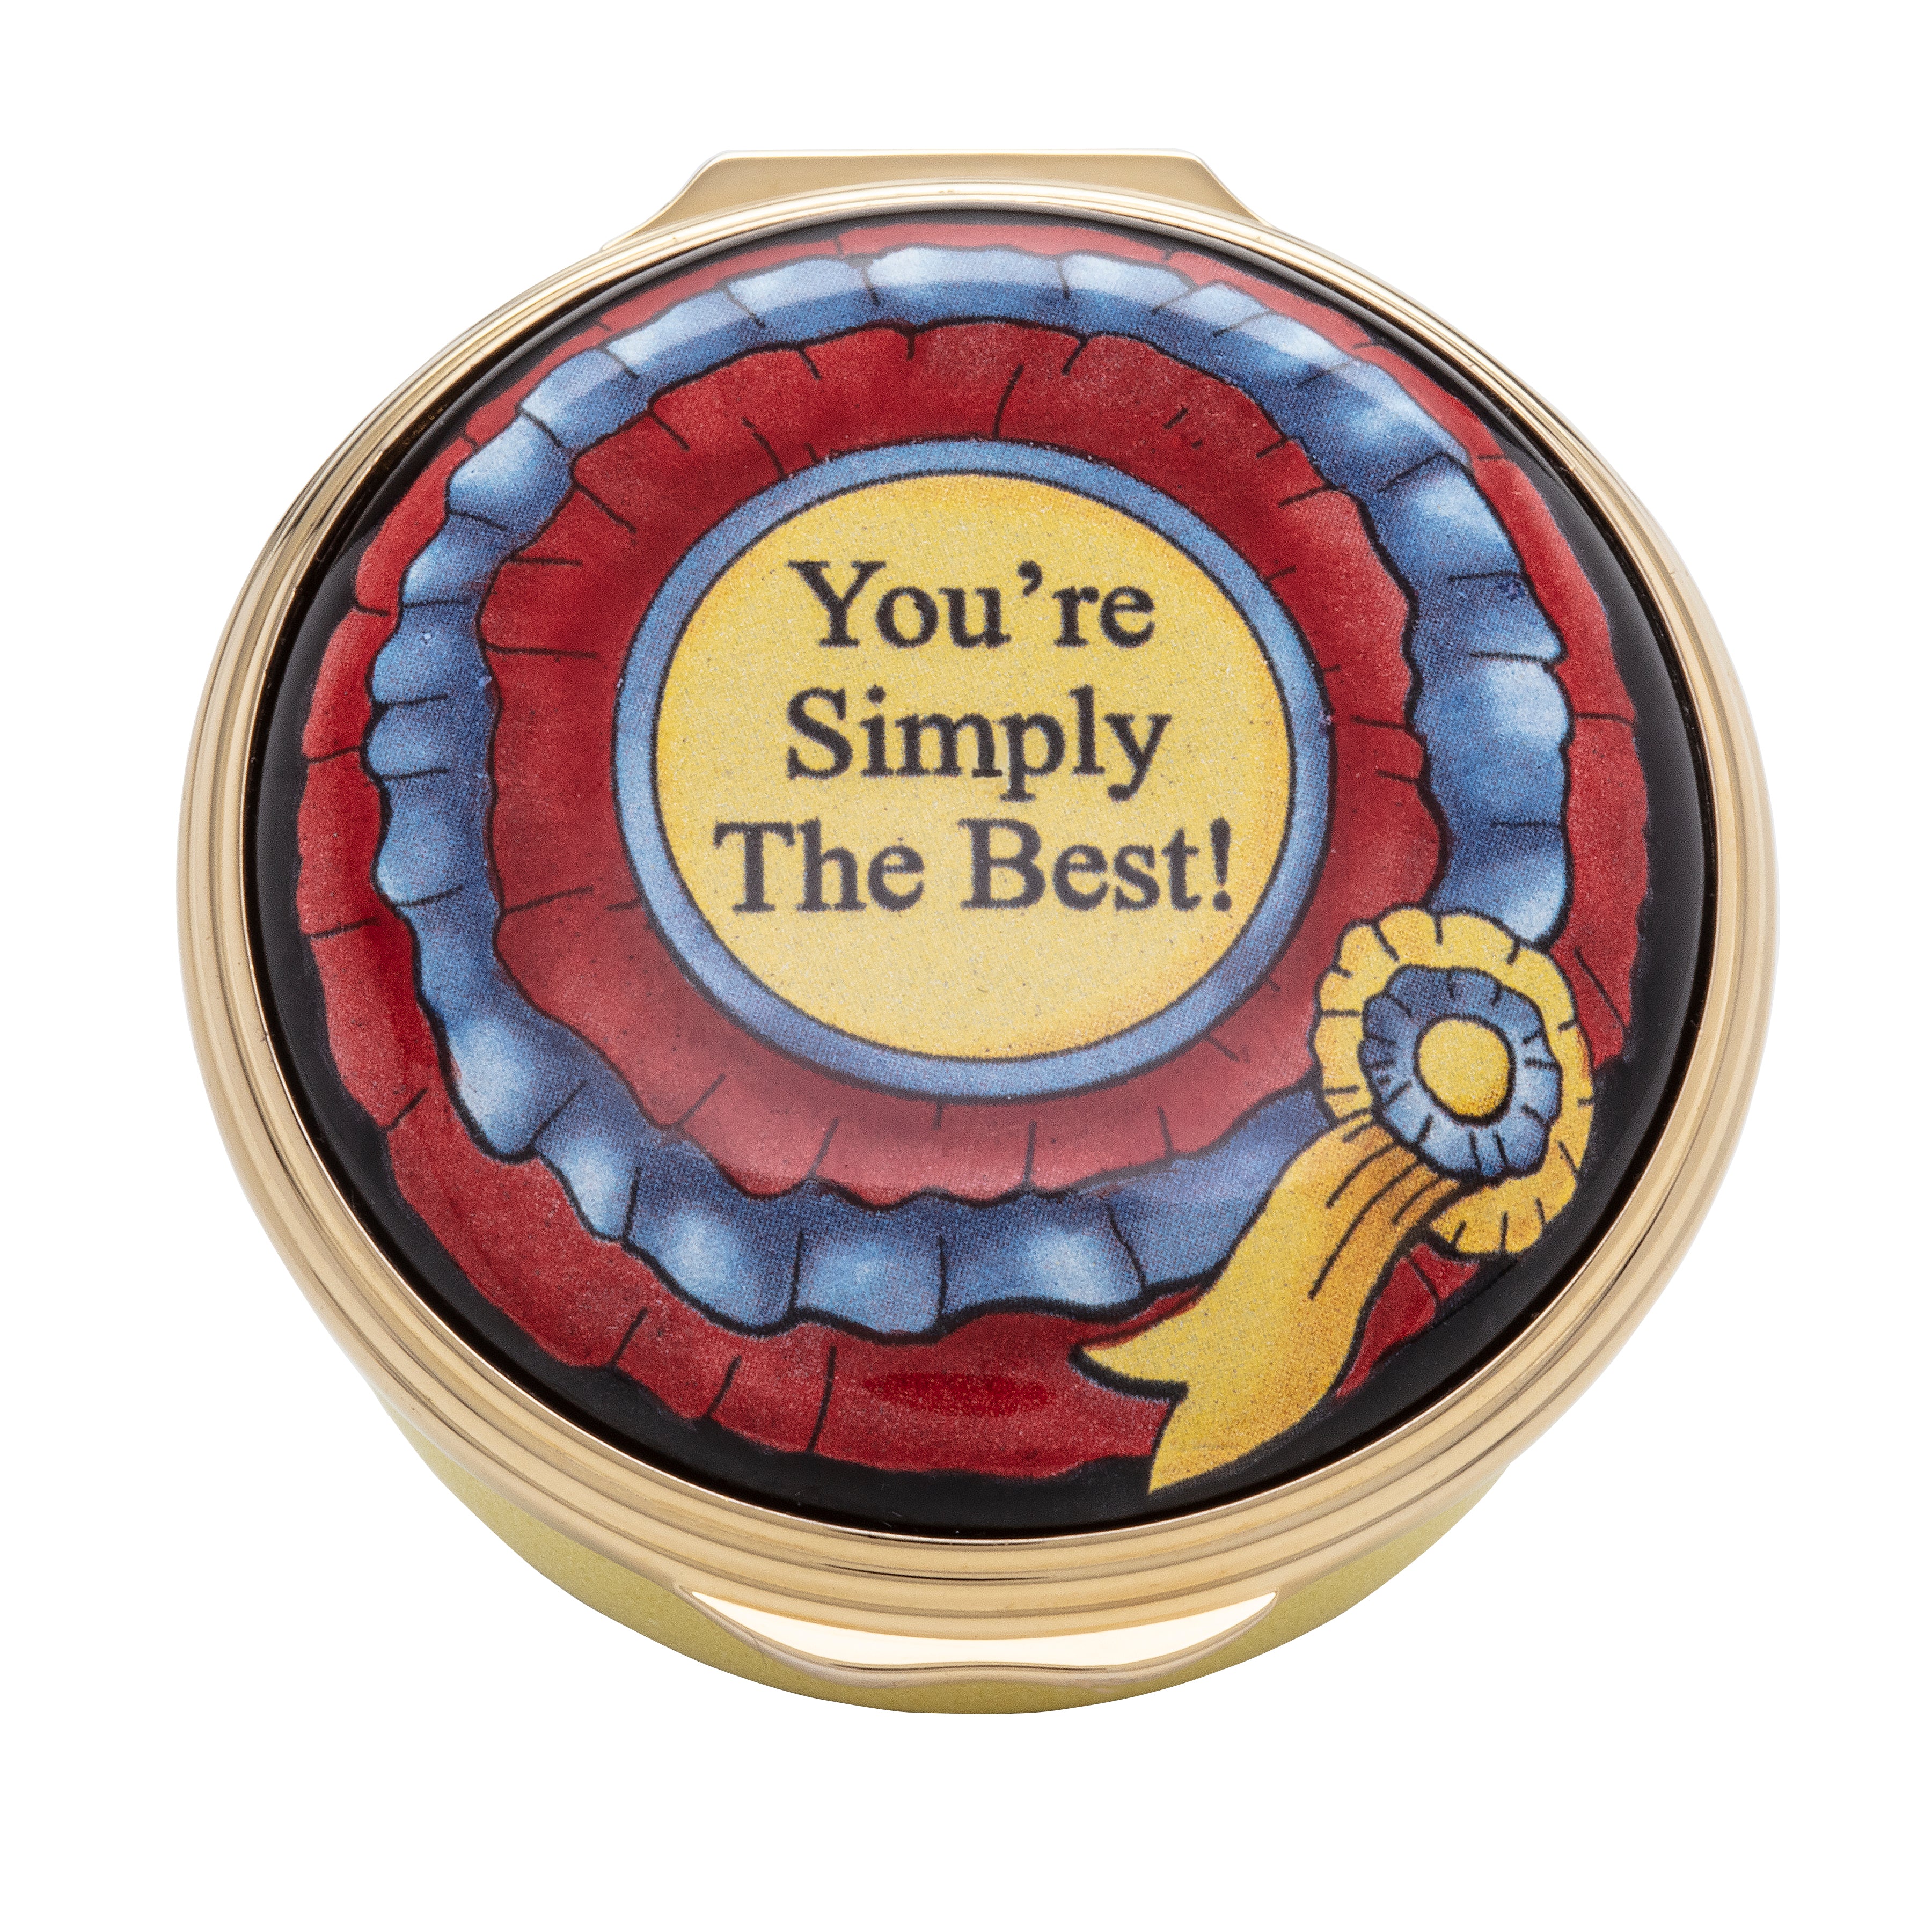 "You're Simply the Best" Enamel Box